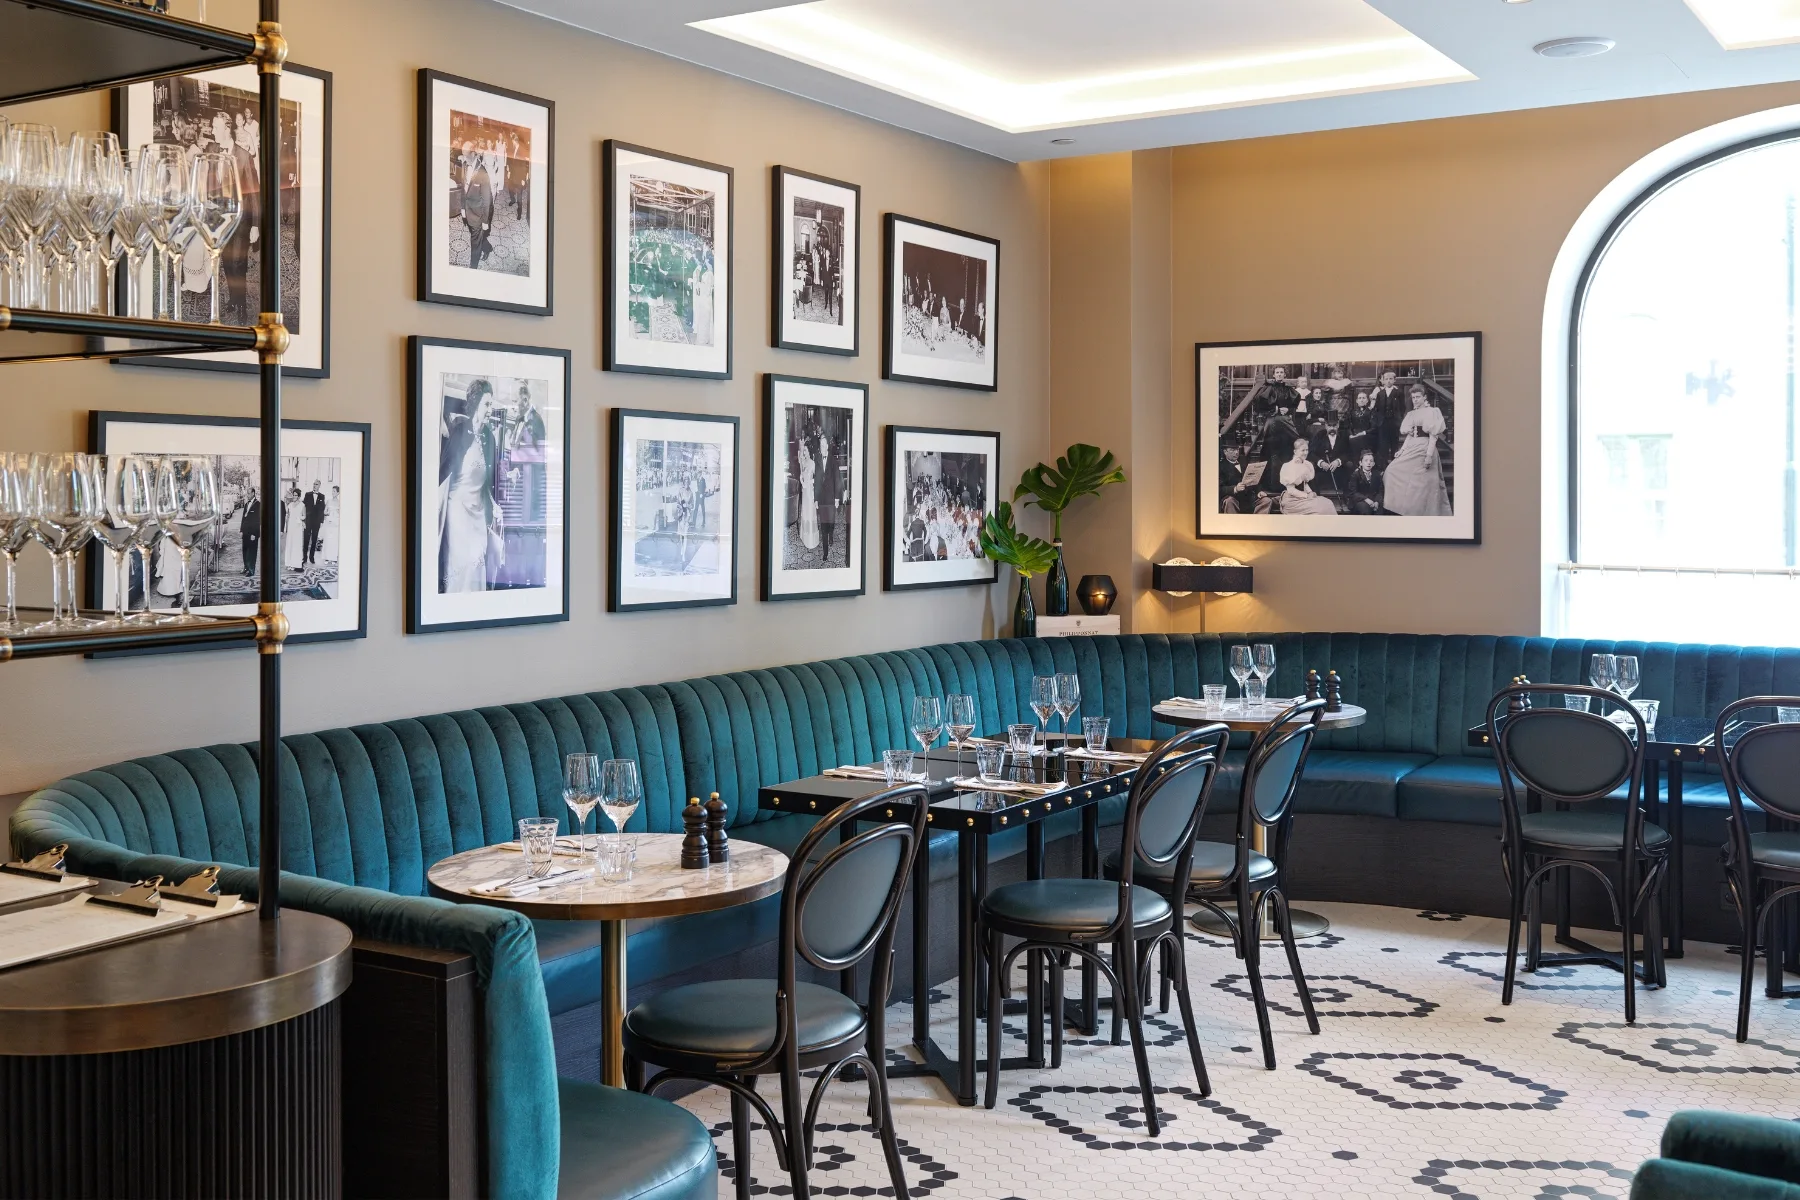 the restaurant interior features contract furniture with blue couches and framed pictures